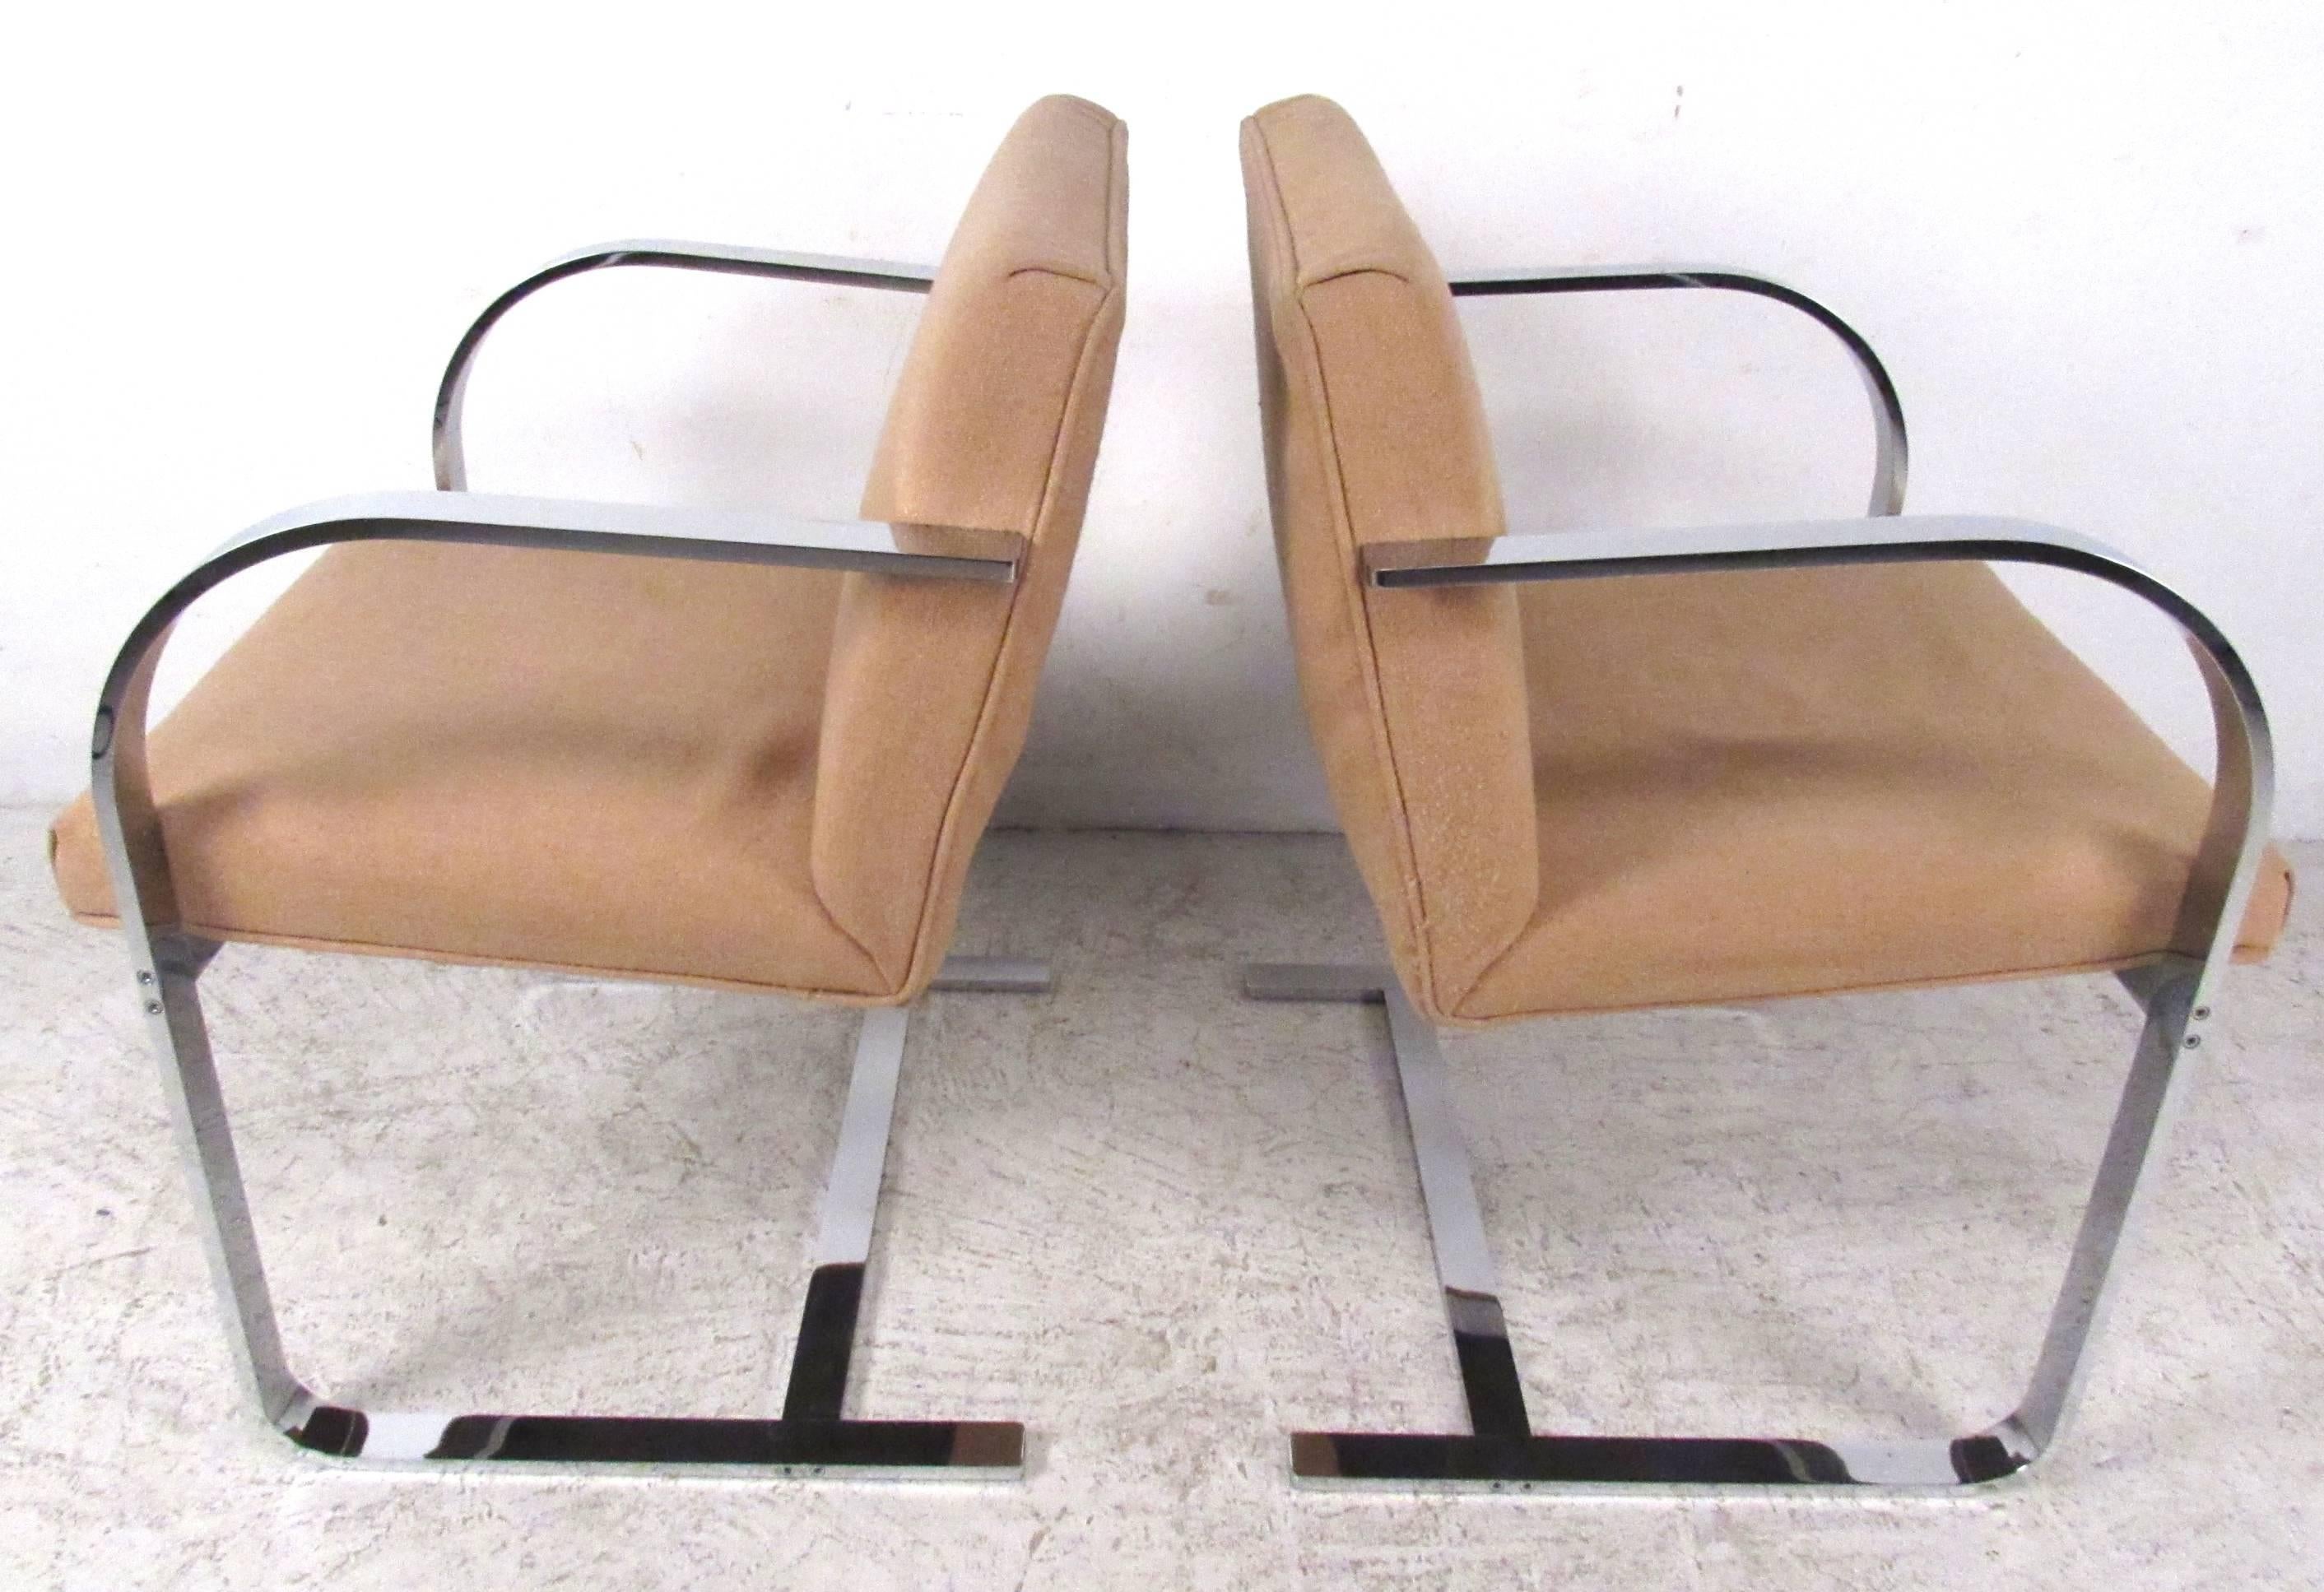 mies van der rohe chairs for sale